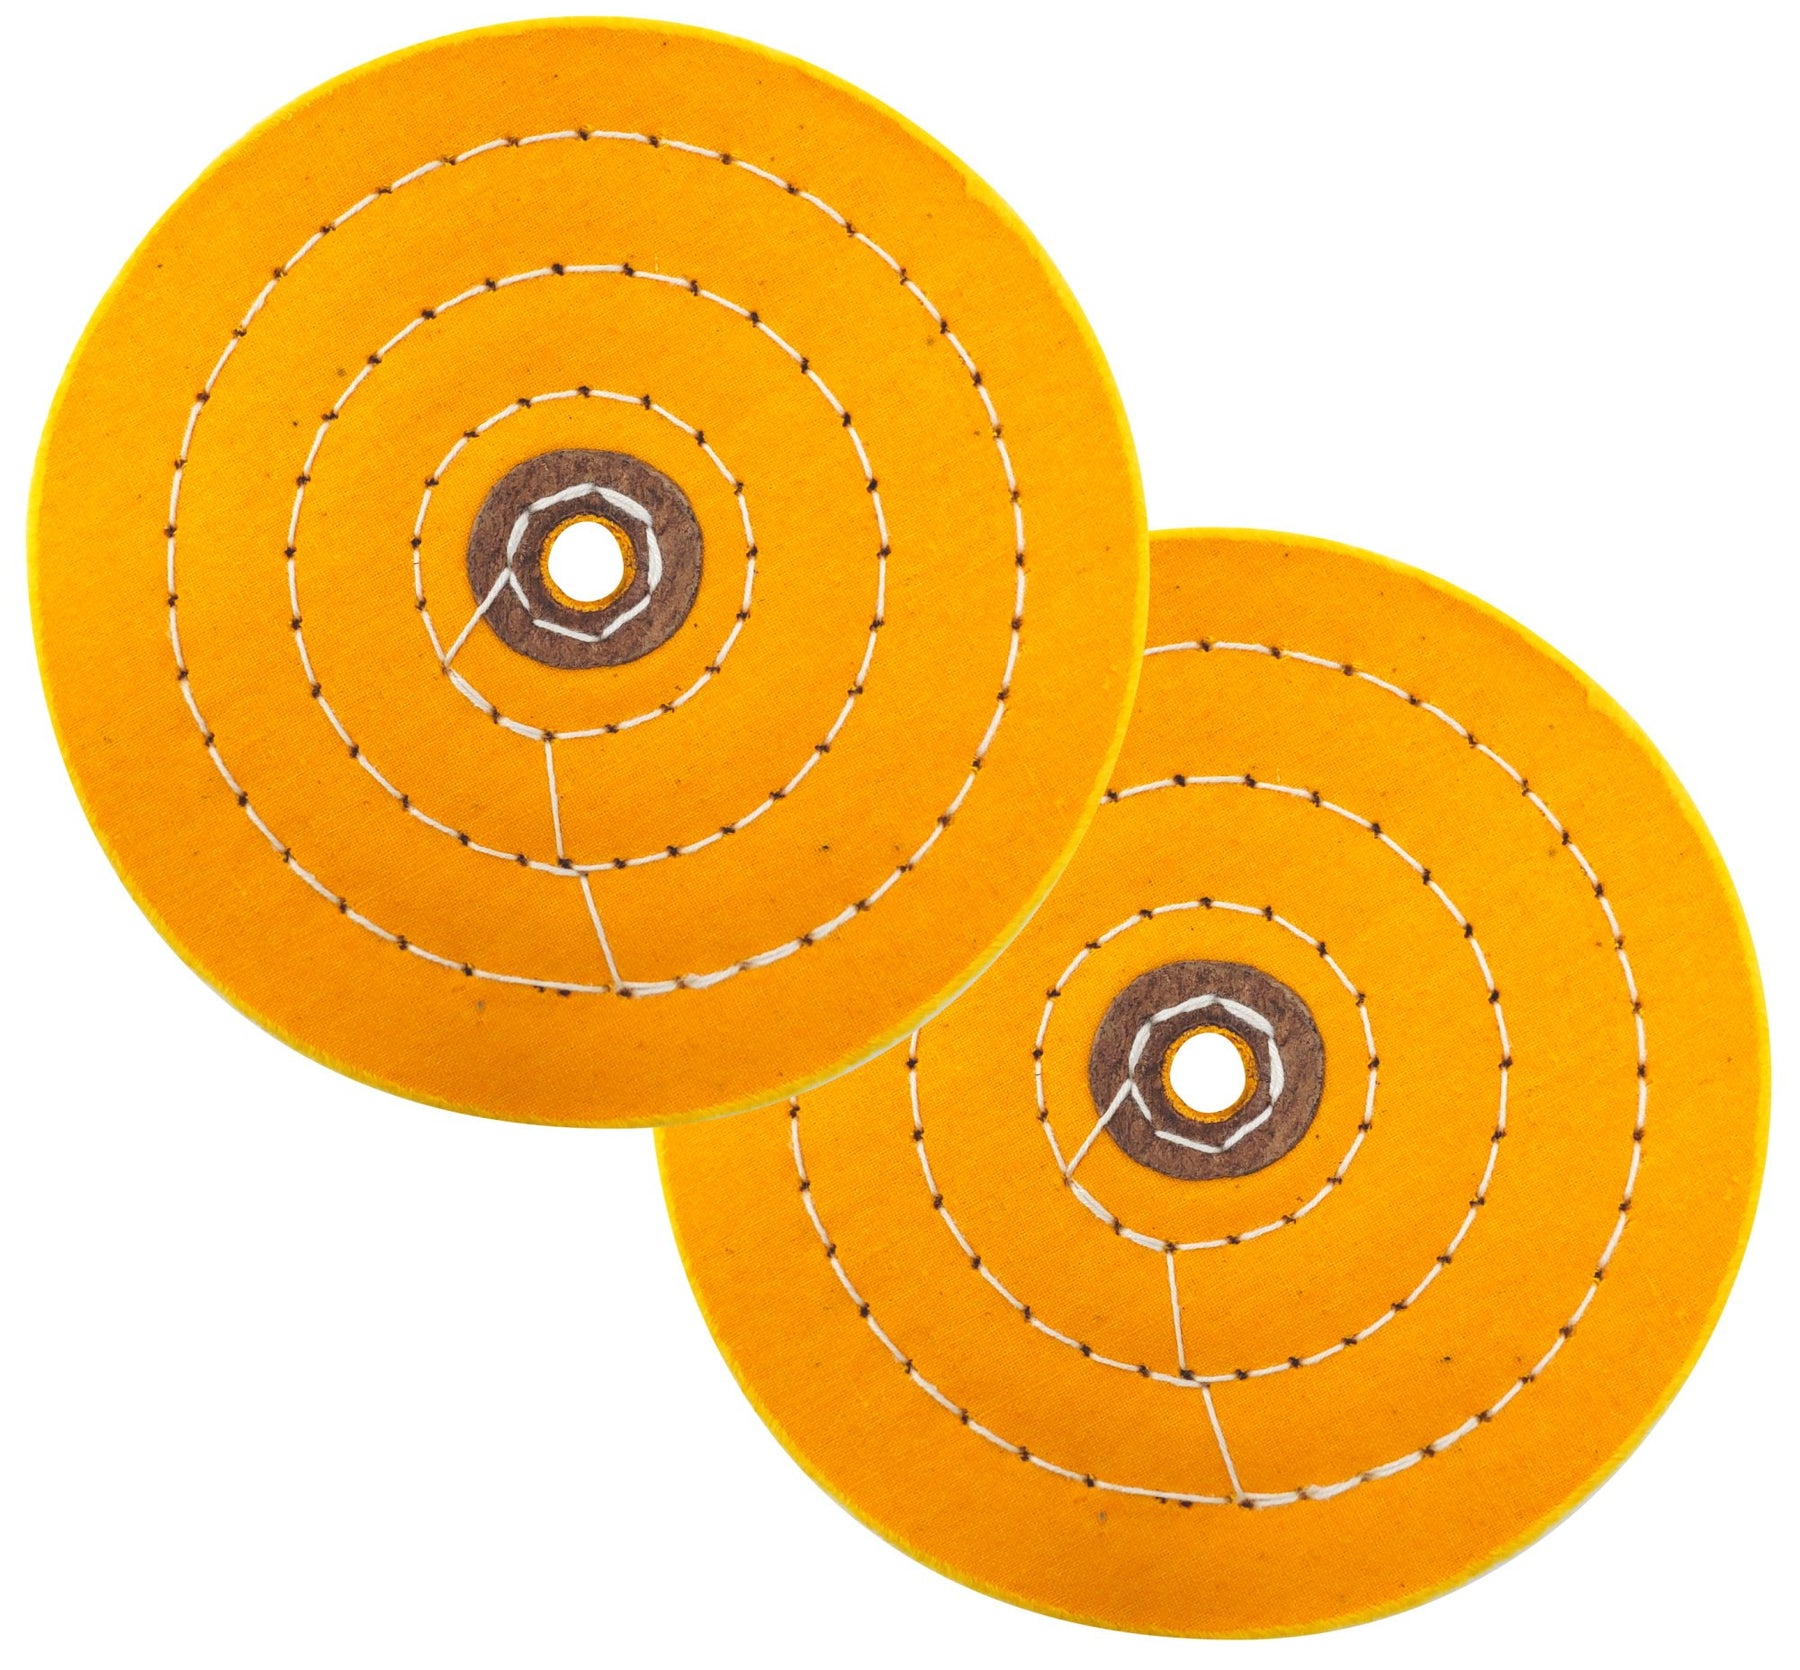 6 Metal Buffing Wheel Kit for Bench Grinder for Gold, Silver, Copper –  LINE10 Tools